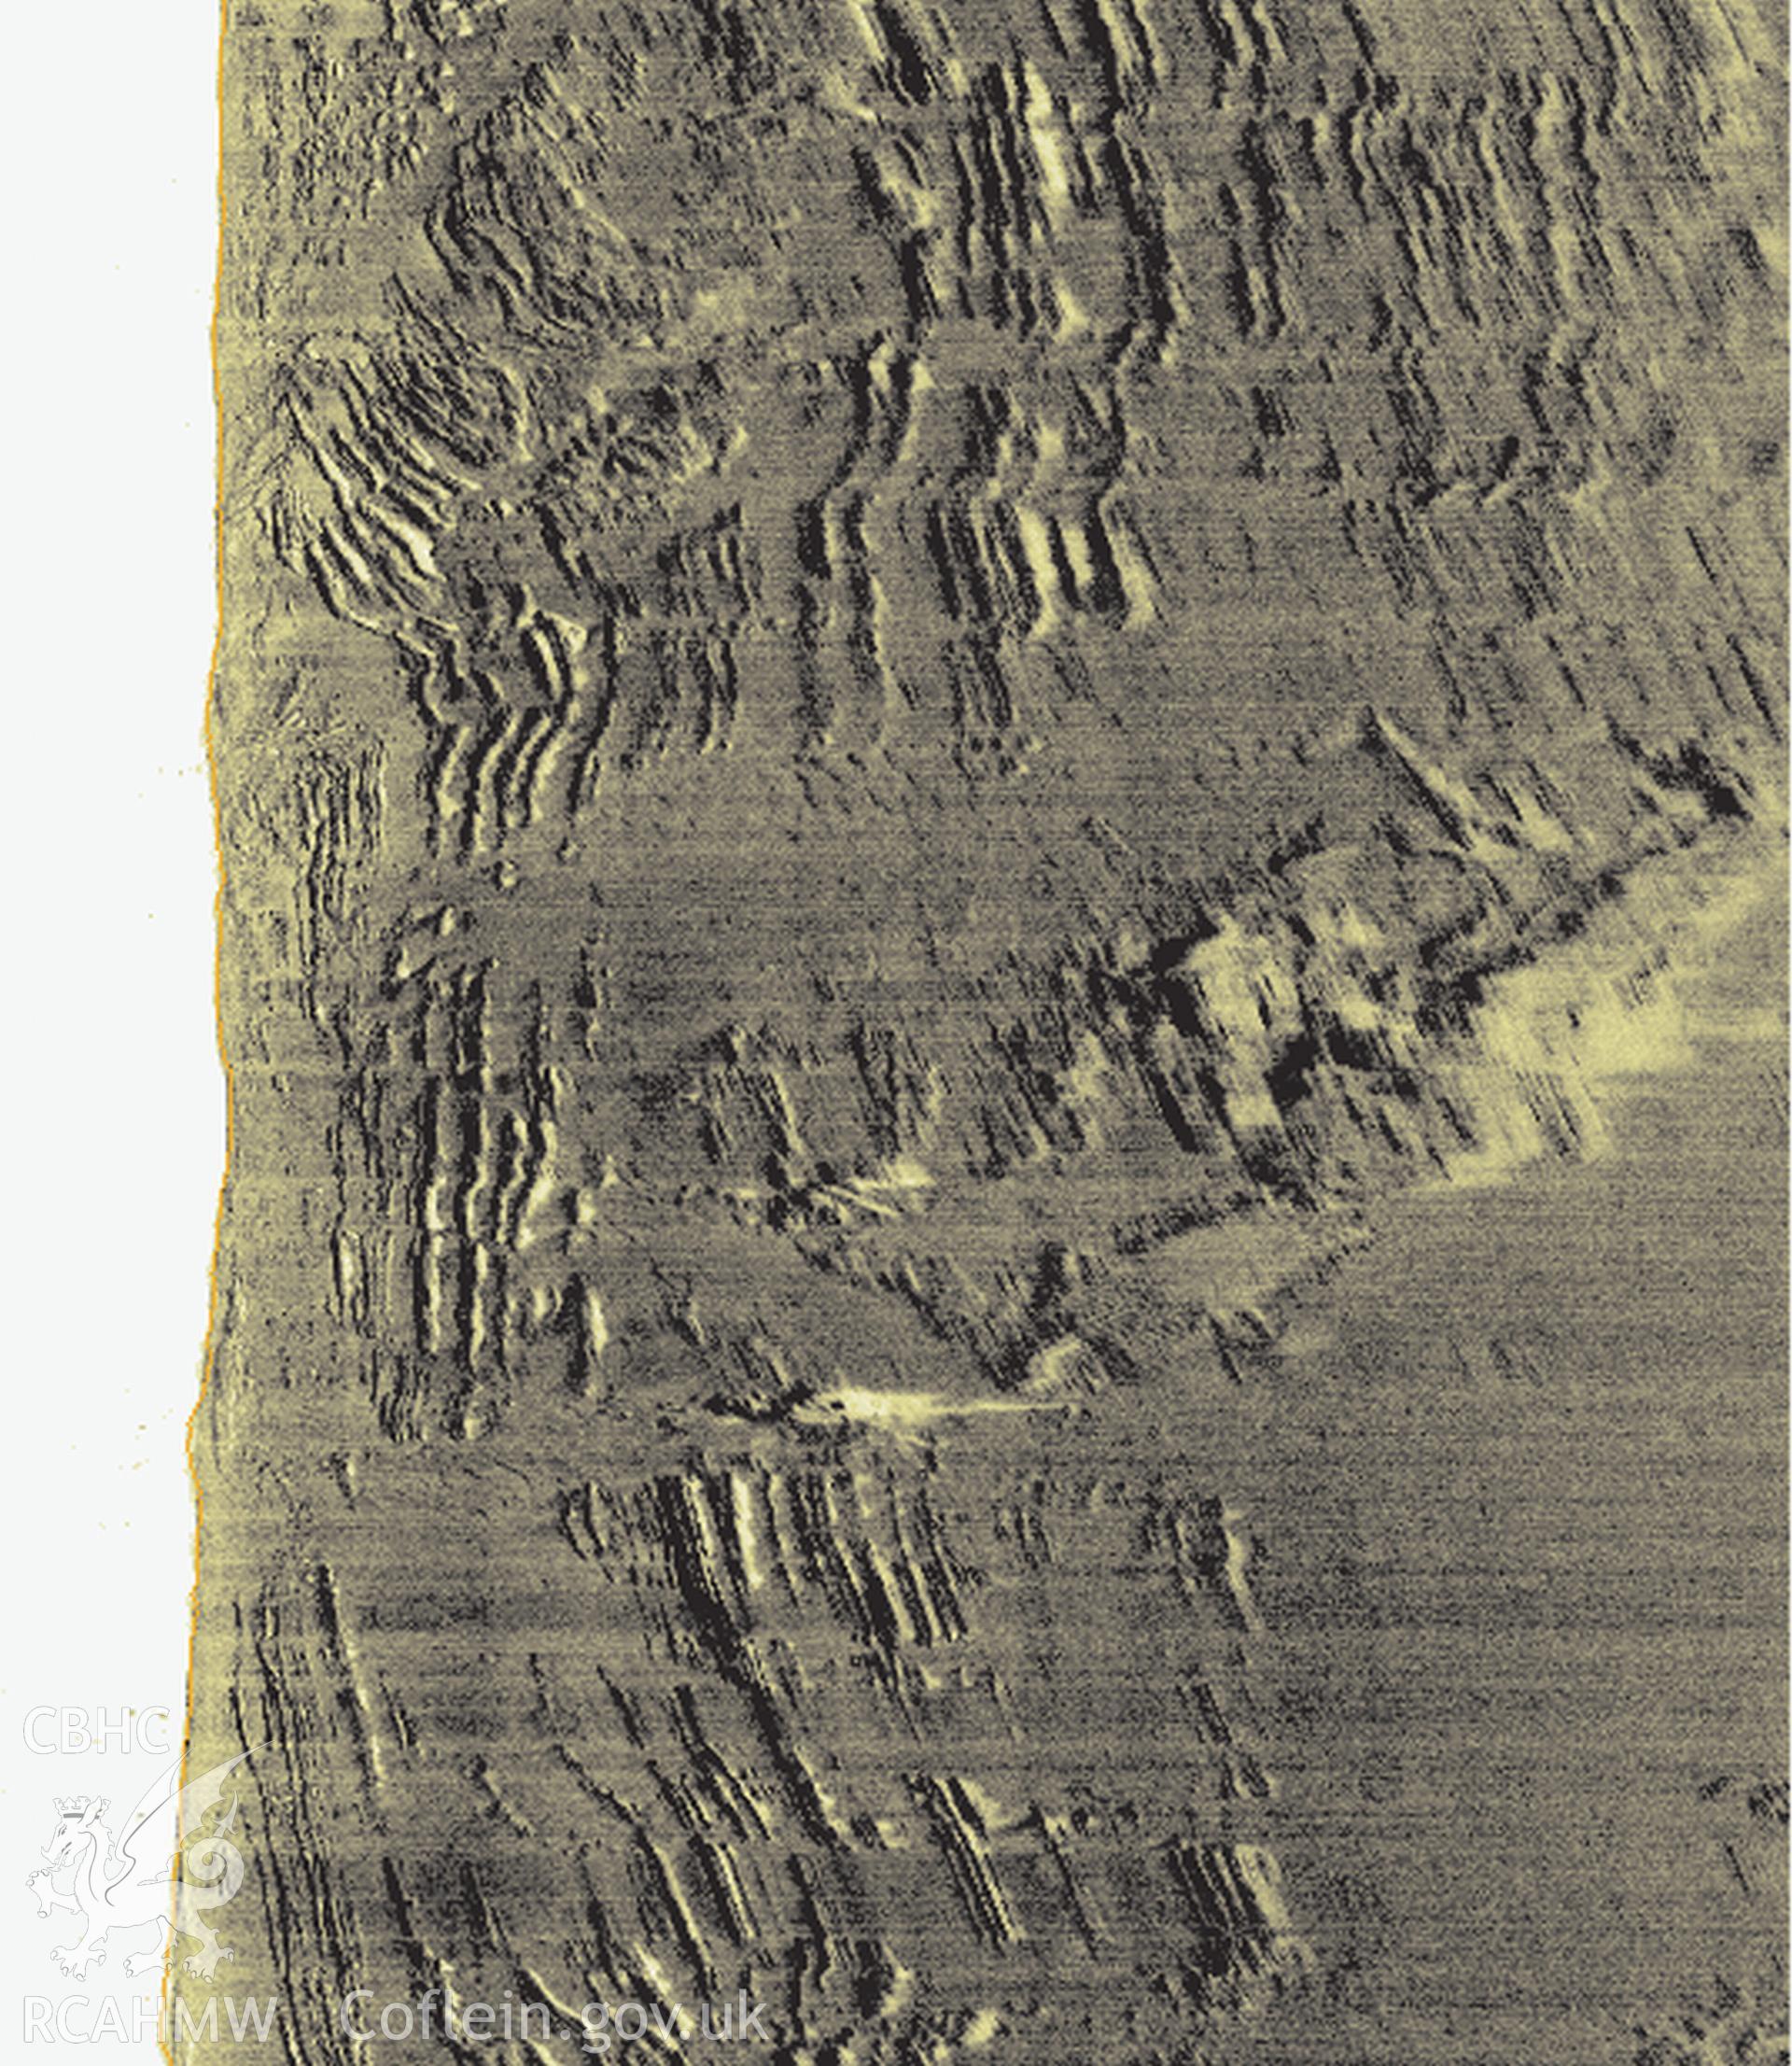 Side scan sonar image of the St Jacques gathered by Wessex Archaeology  and published in Wrecks off the Coast of Wales, November 2010, Report Ref No : 53111.02,  fig 11 D.7021. Viewed from one direction a mast appears visible lying on the seabed